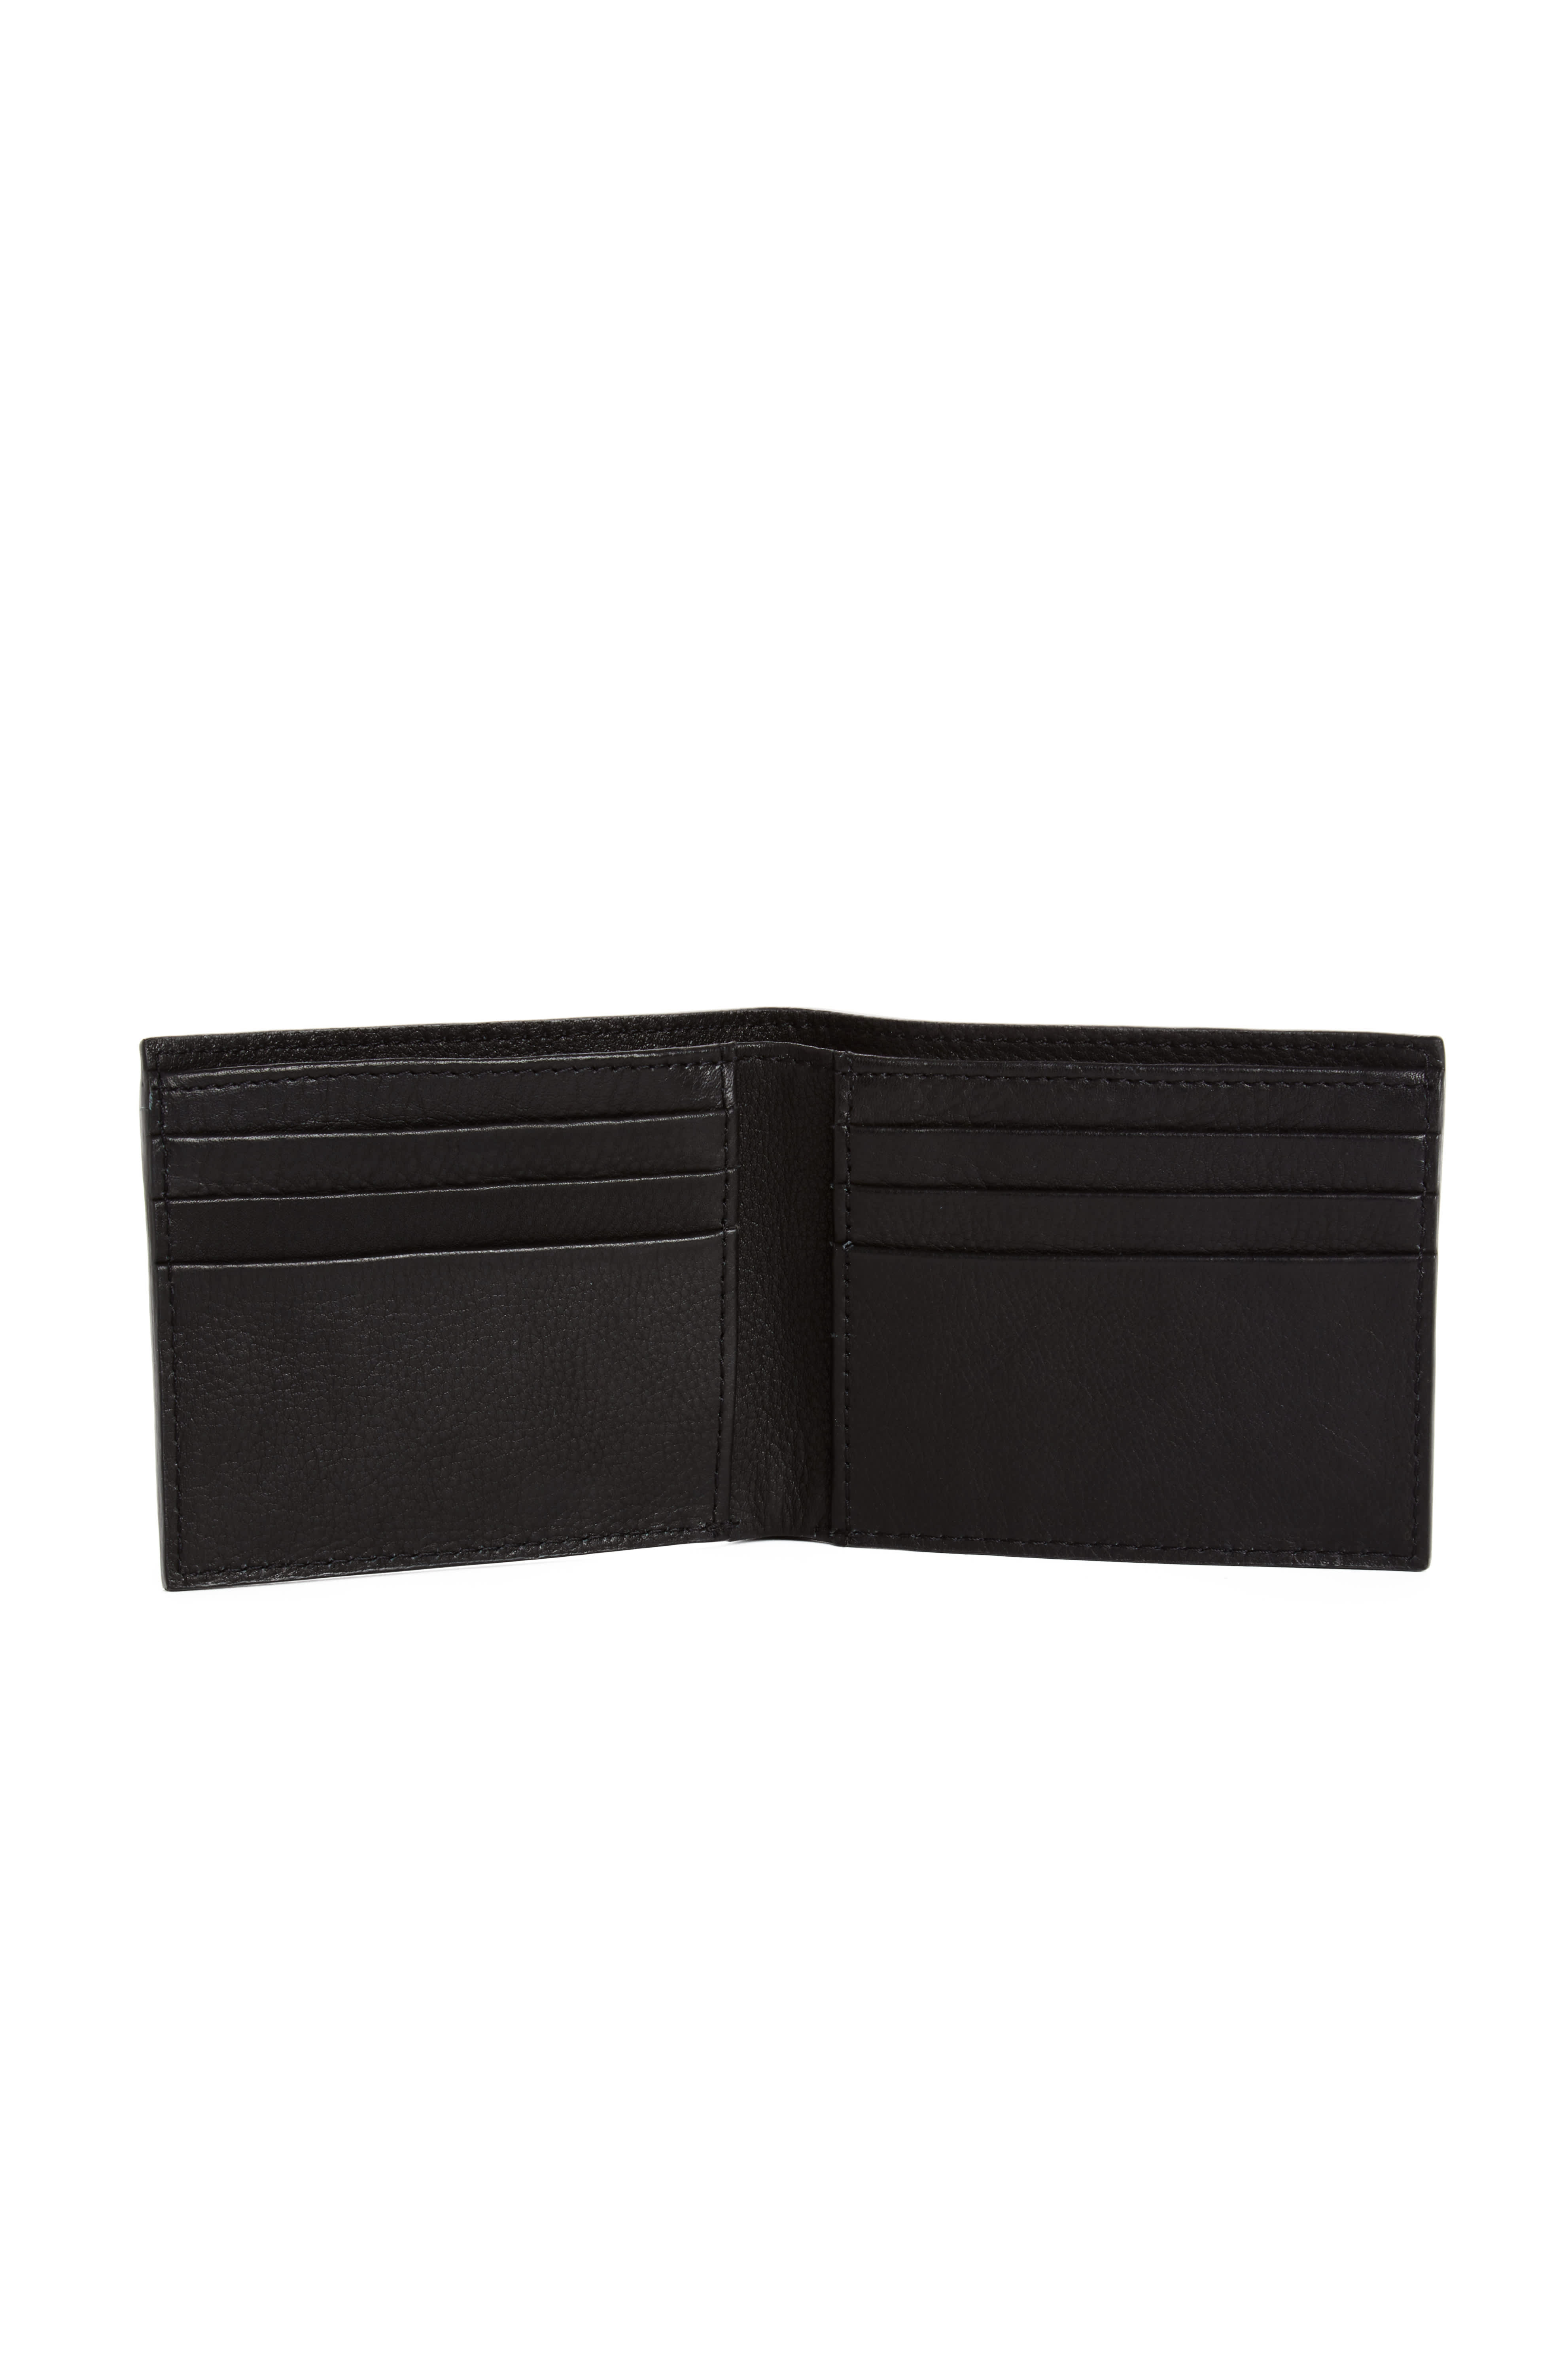 EMBOSSED LEATHER UTILITY BIFOLD WALLET